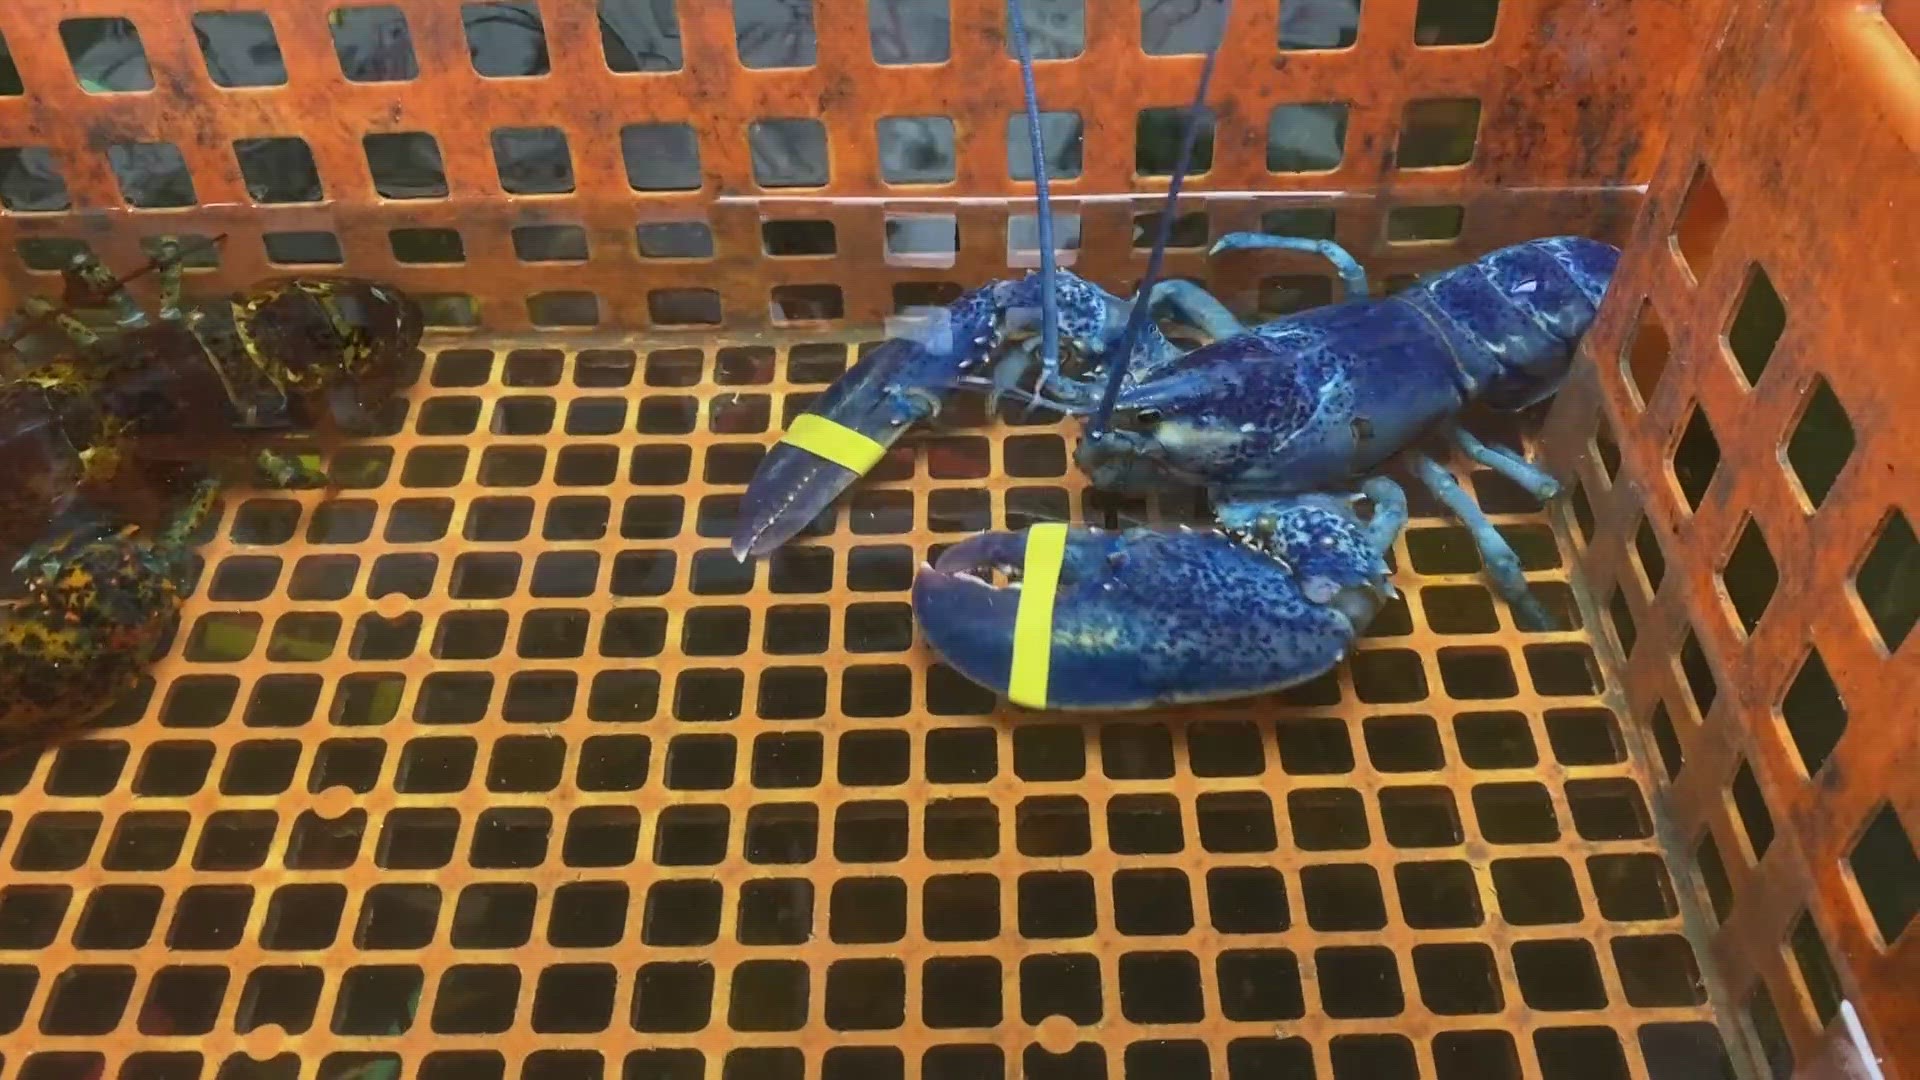 A local lobsterman dropped off a rare blue lobster with his daily haul at Free Range Fish & Lobster on Commercial Street on Thursday.